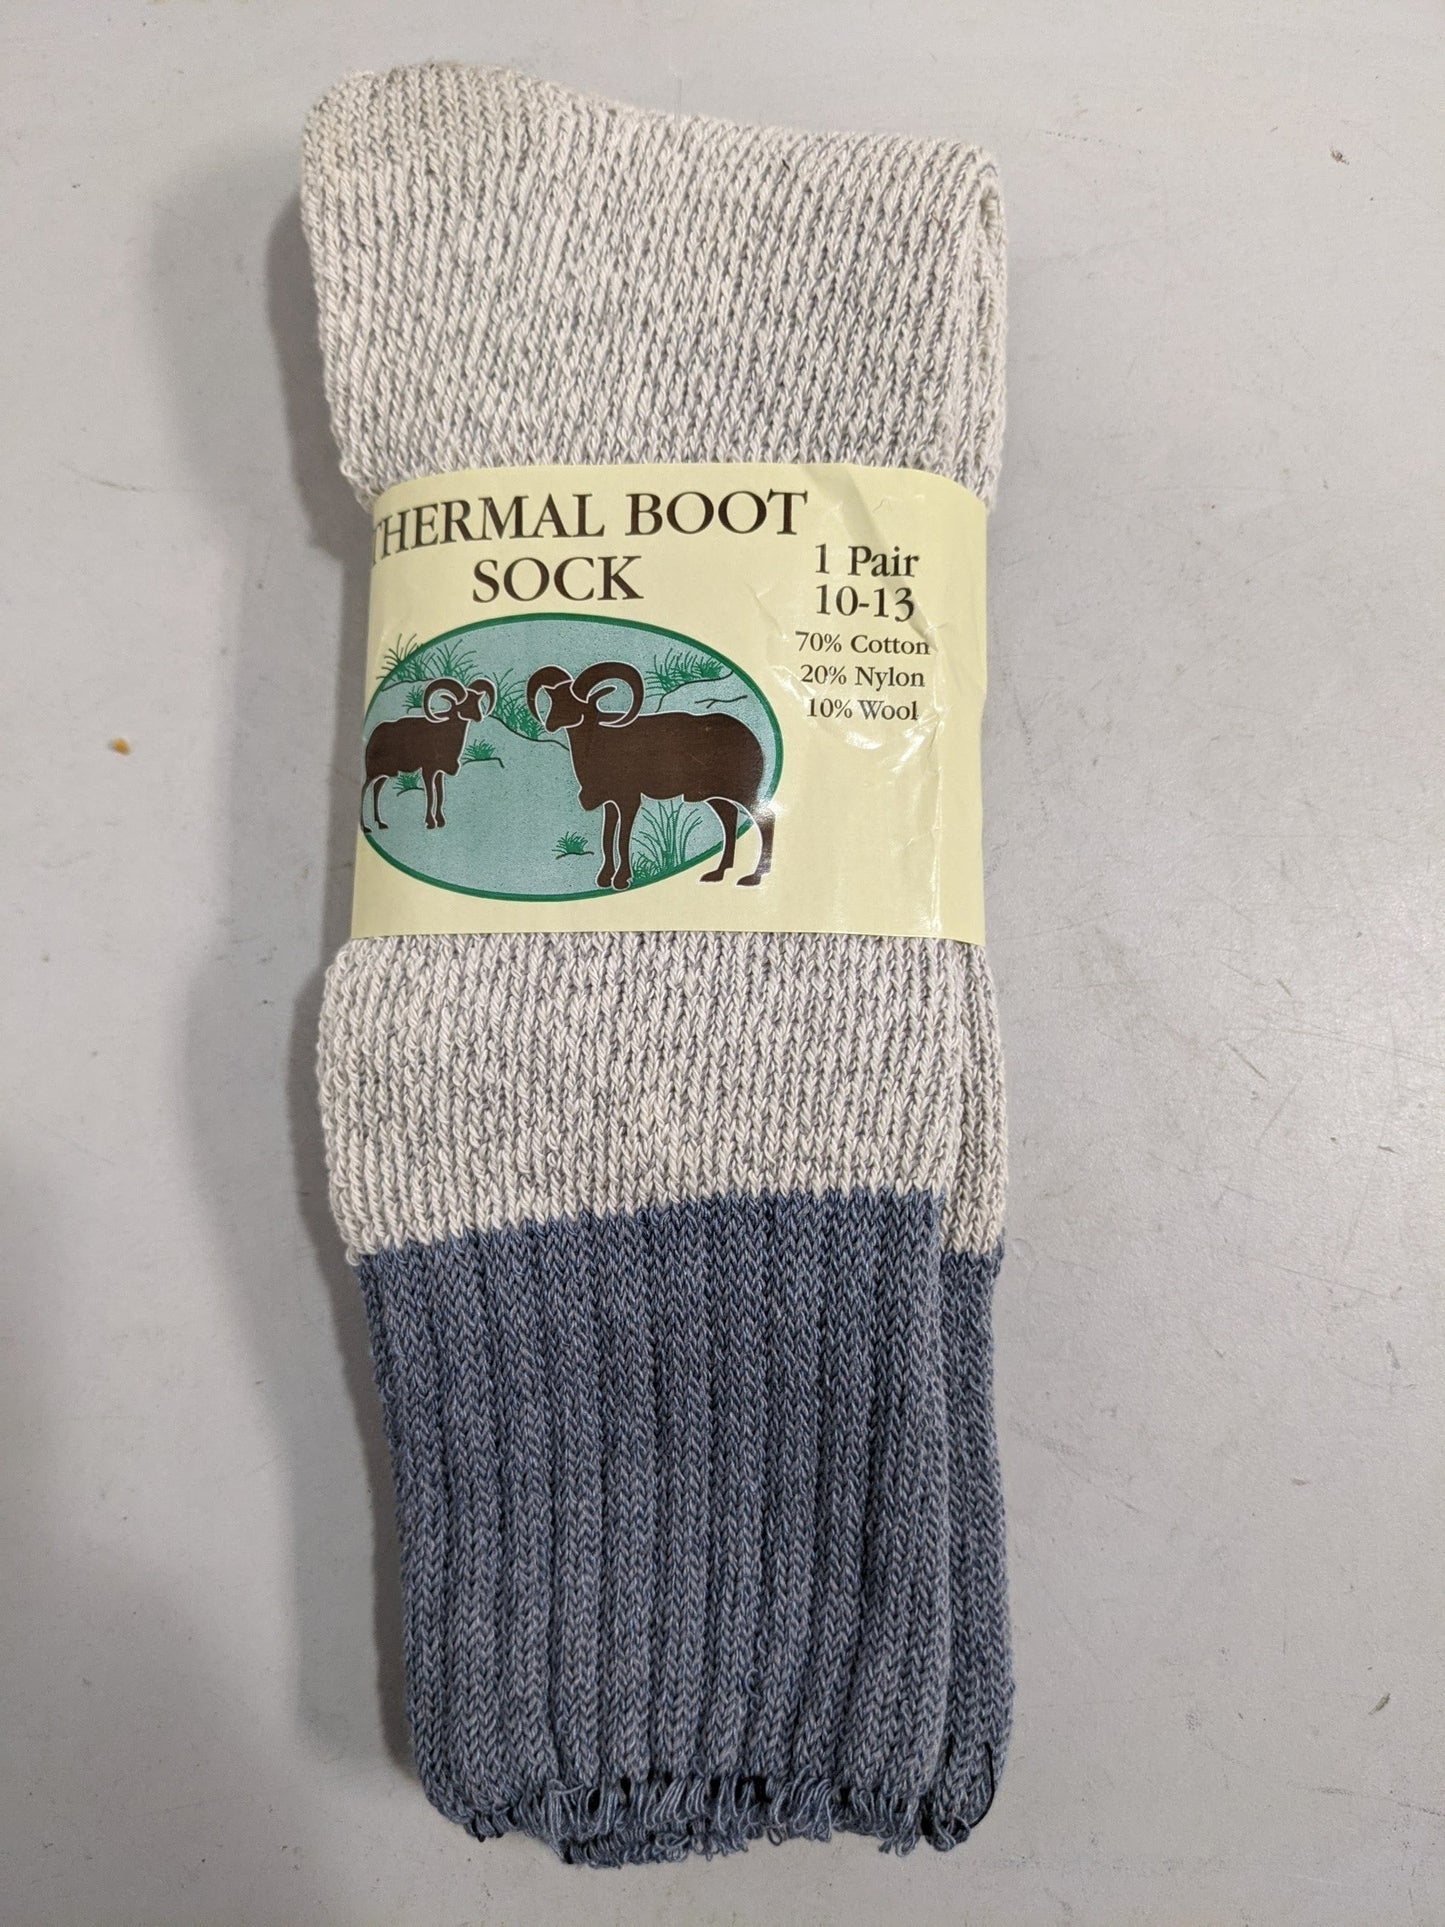 Thermal Boot Sock Size 10-13 70% Cotton, 20% Nylon, 10% Wool, Gray New